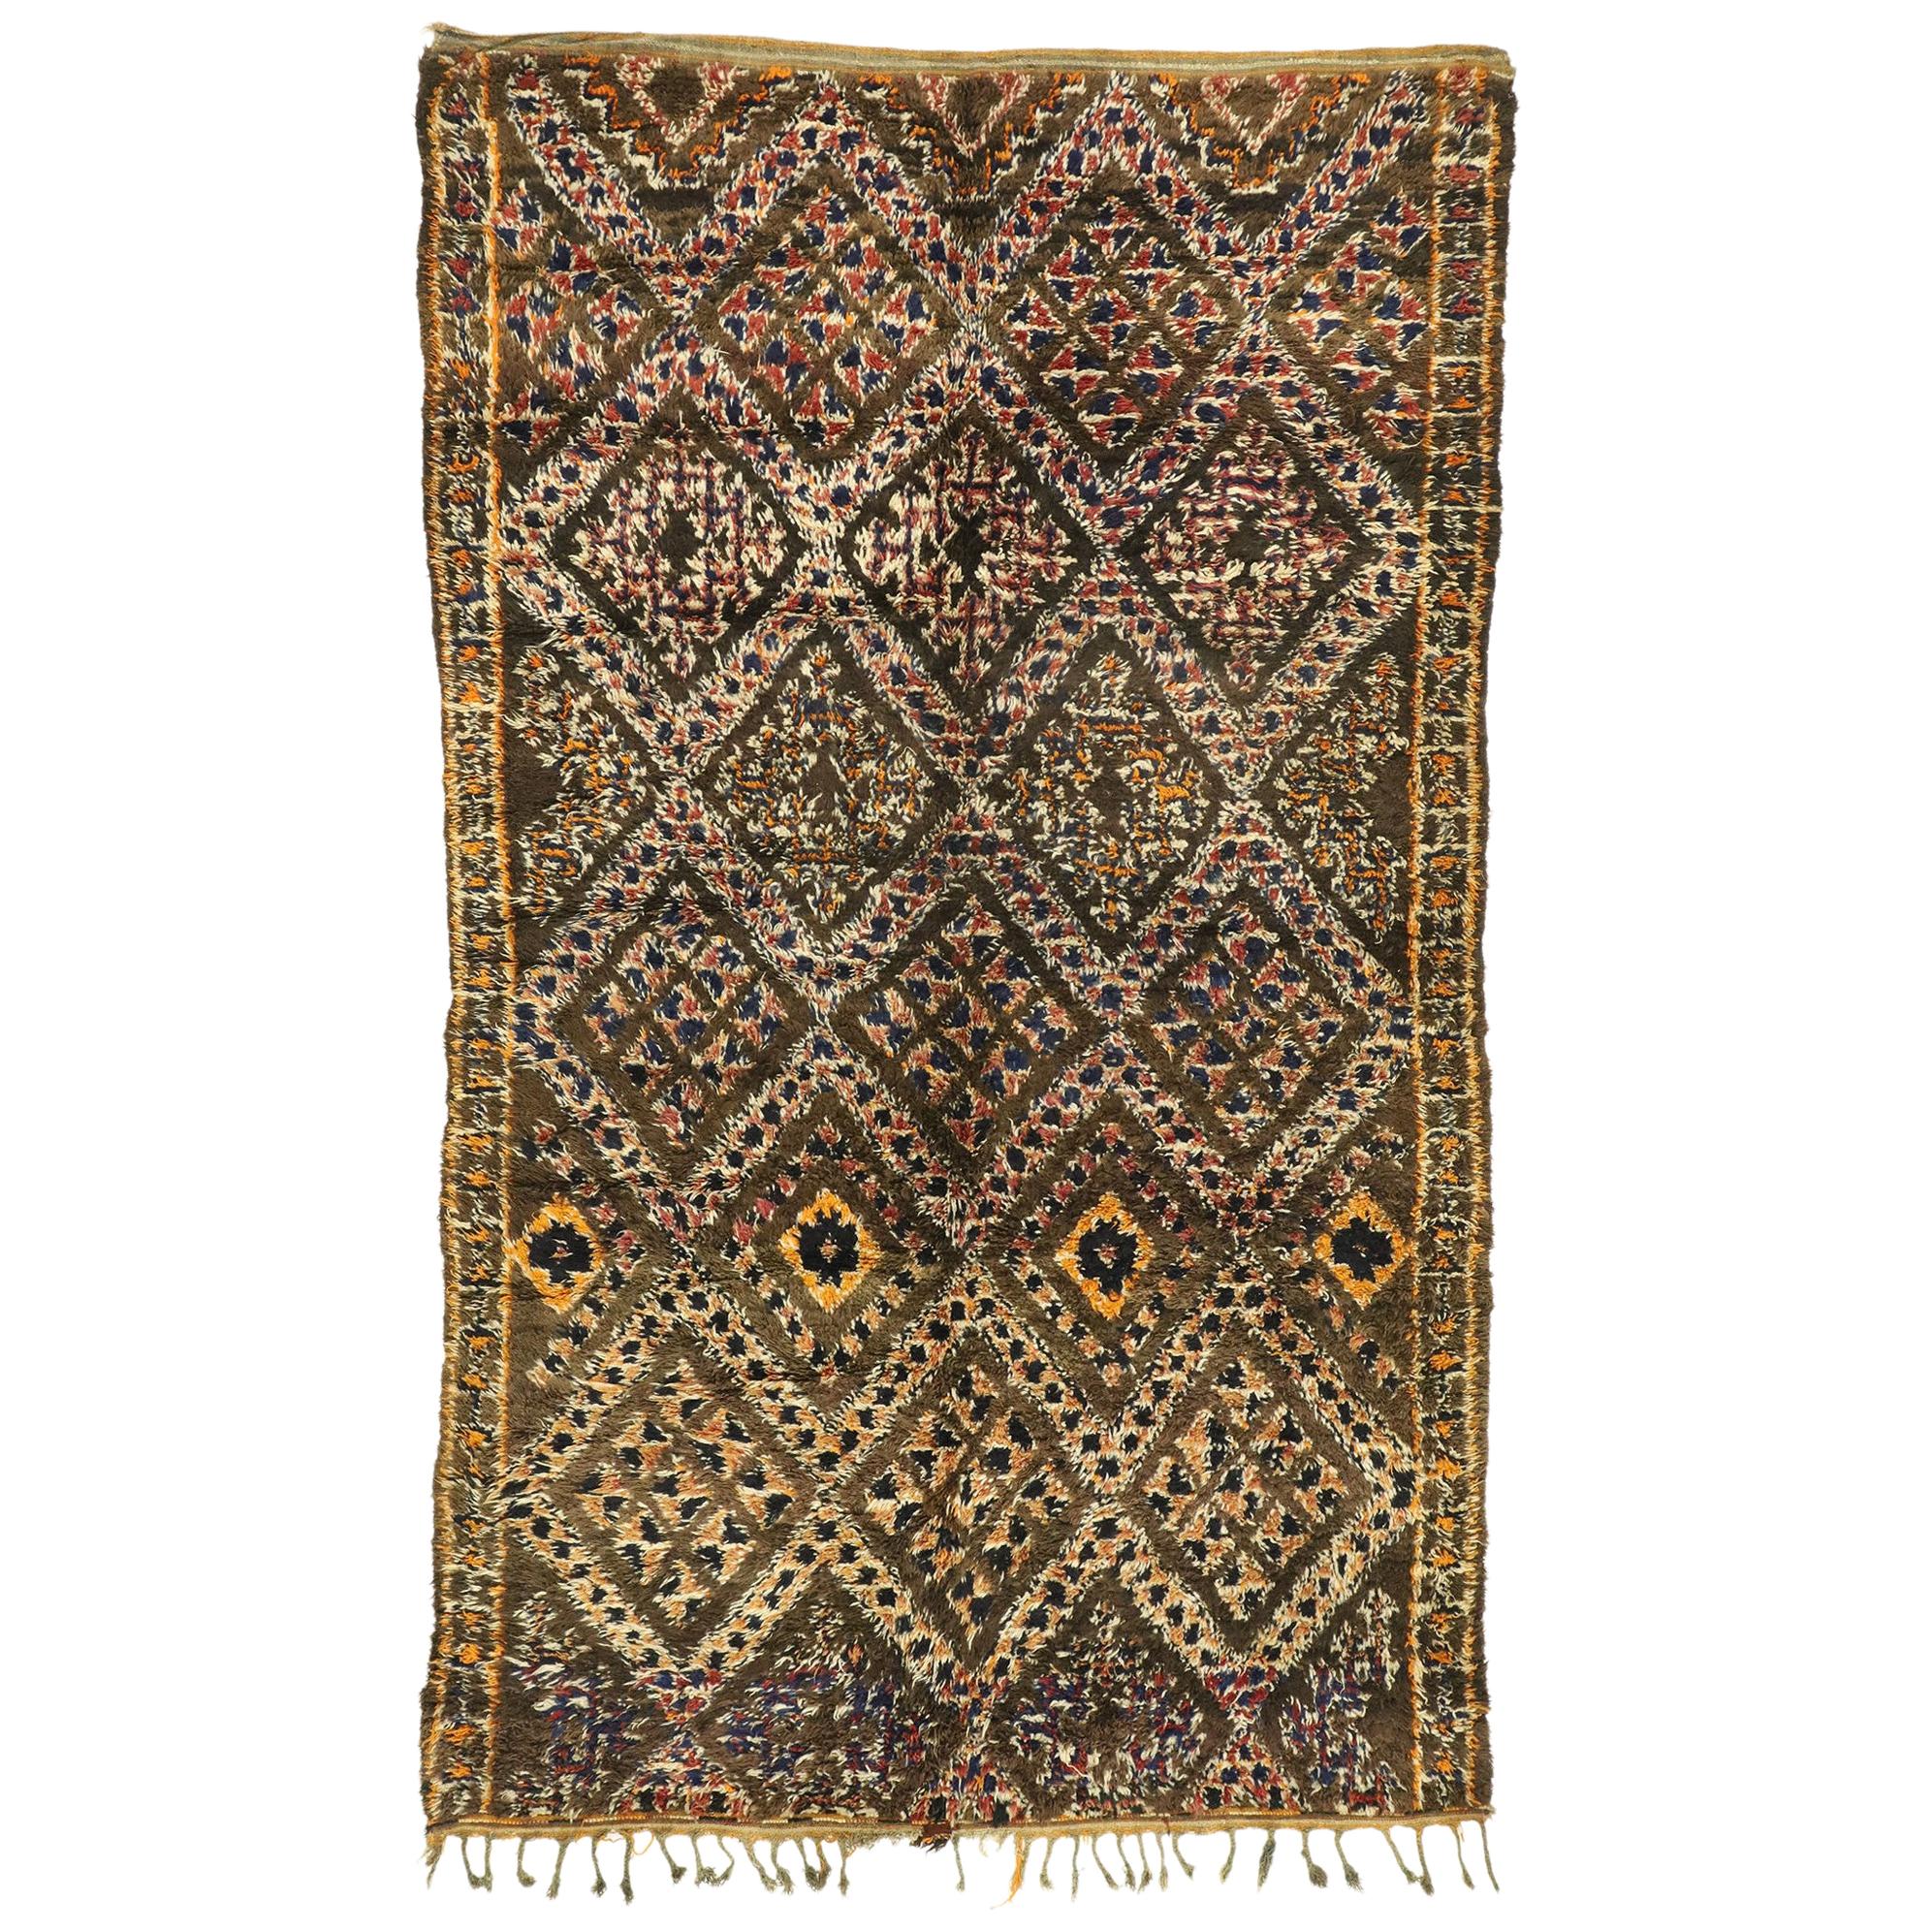 Vintage Chocolate Brown Beni M'Guild Moroccan Rug with Mid-Century Modern Style